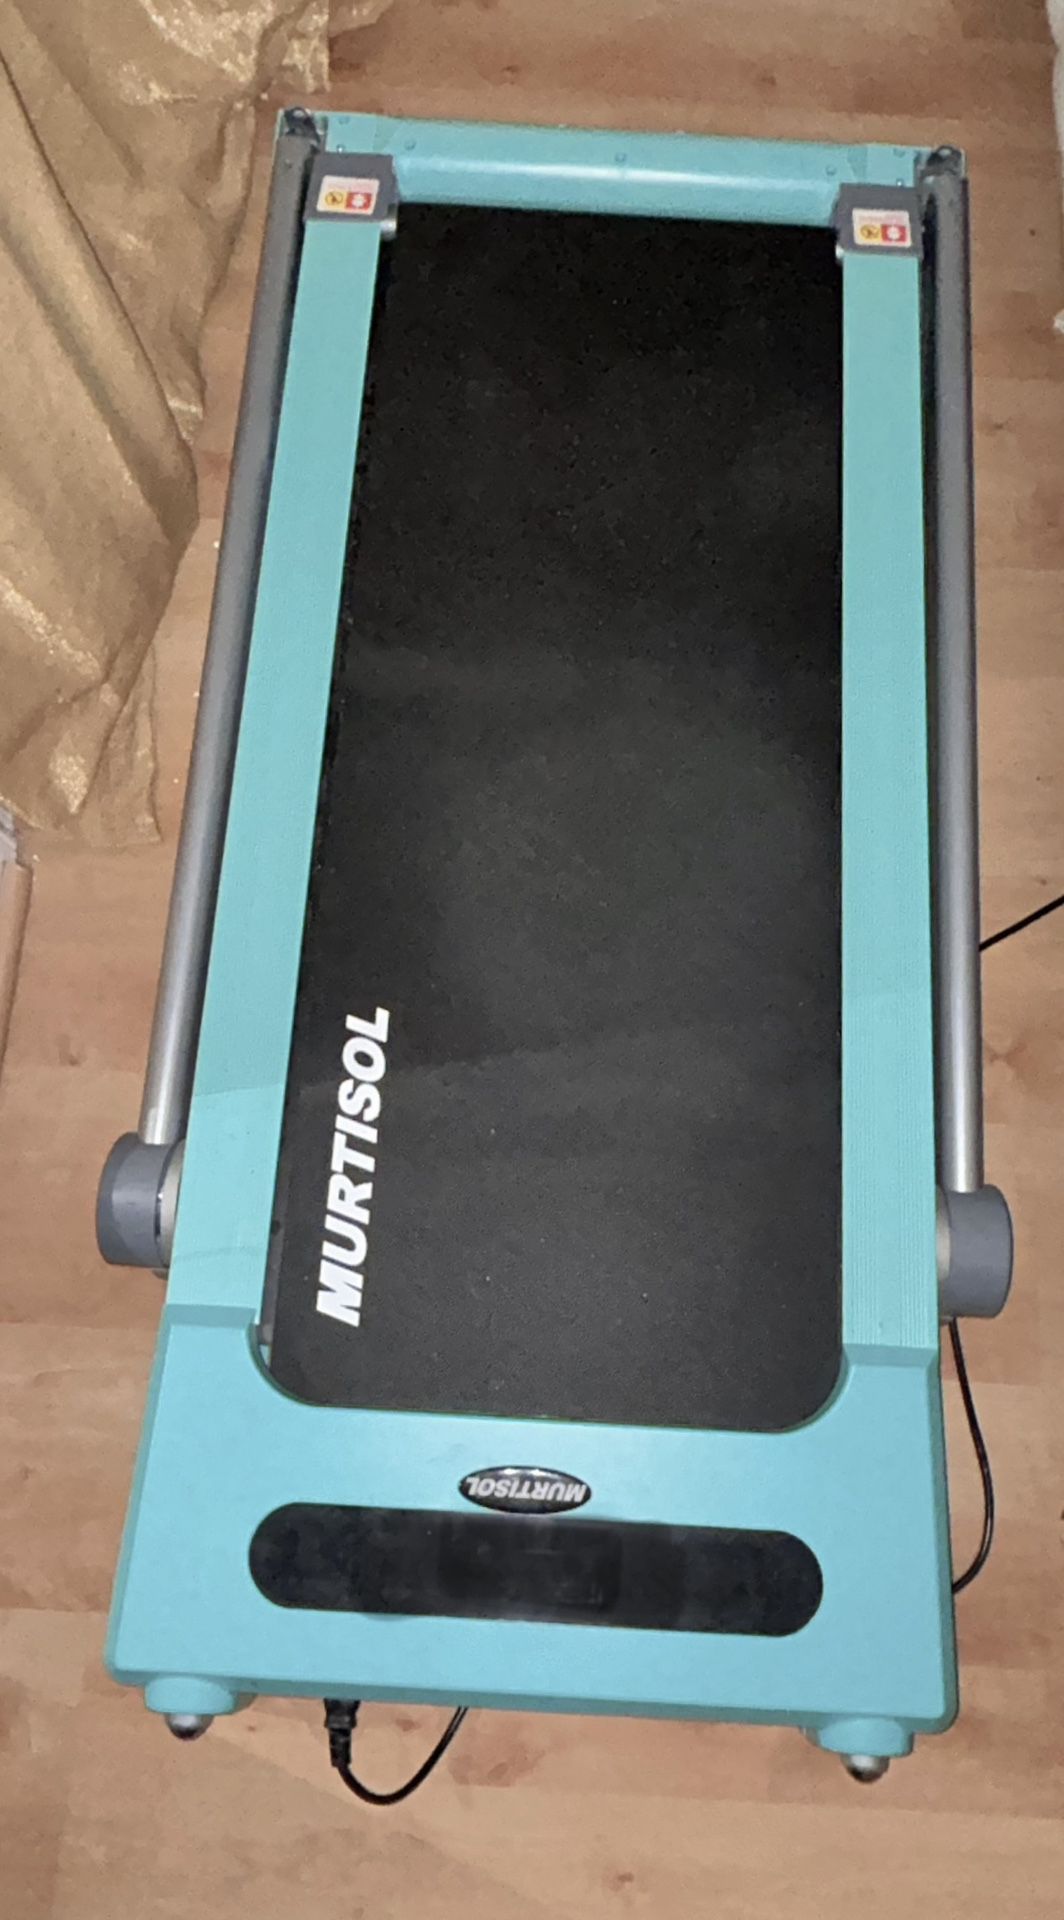 Folding Treadmill Electric with wheels/device holder-Murtisol-blue